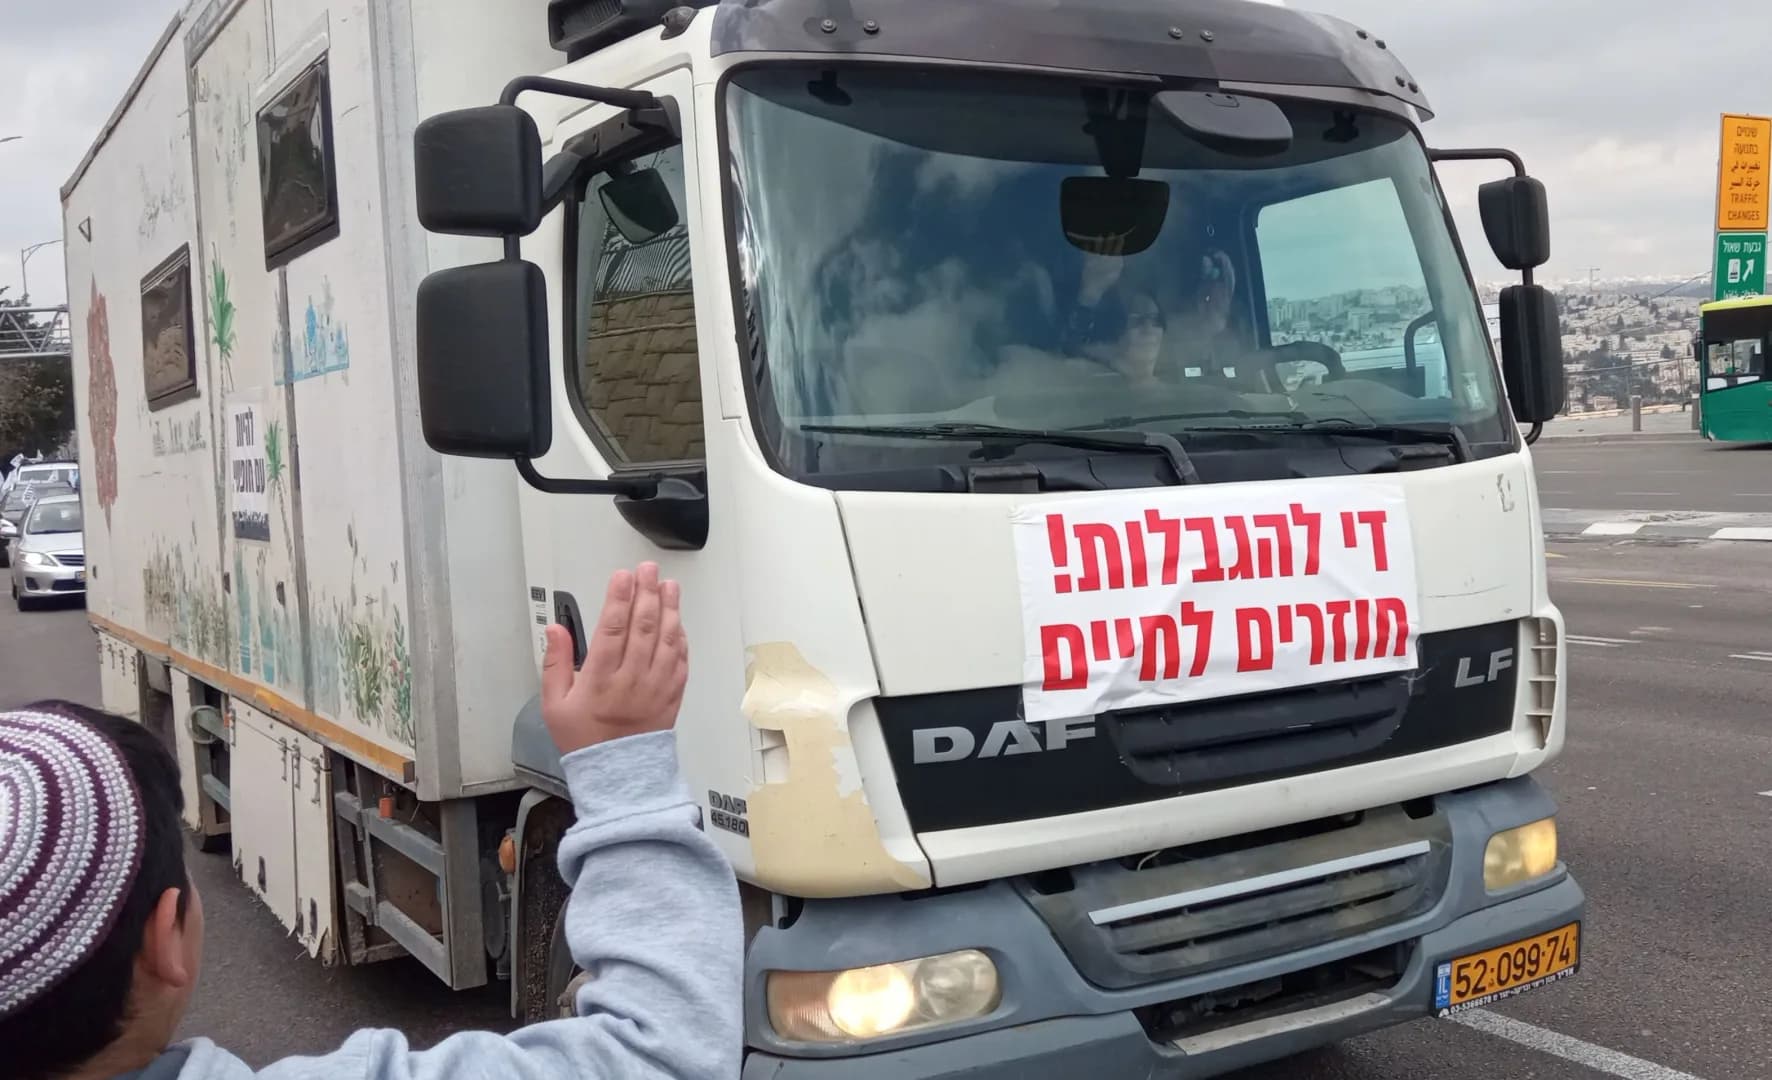 Israeli convoy and protest against COVID mandates gets evicted